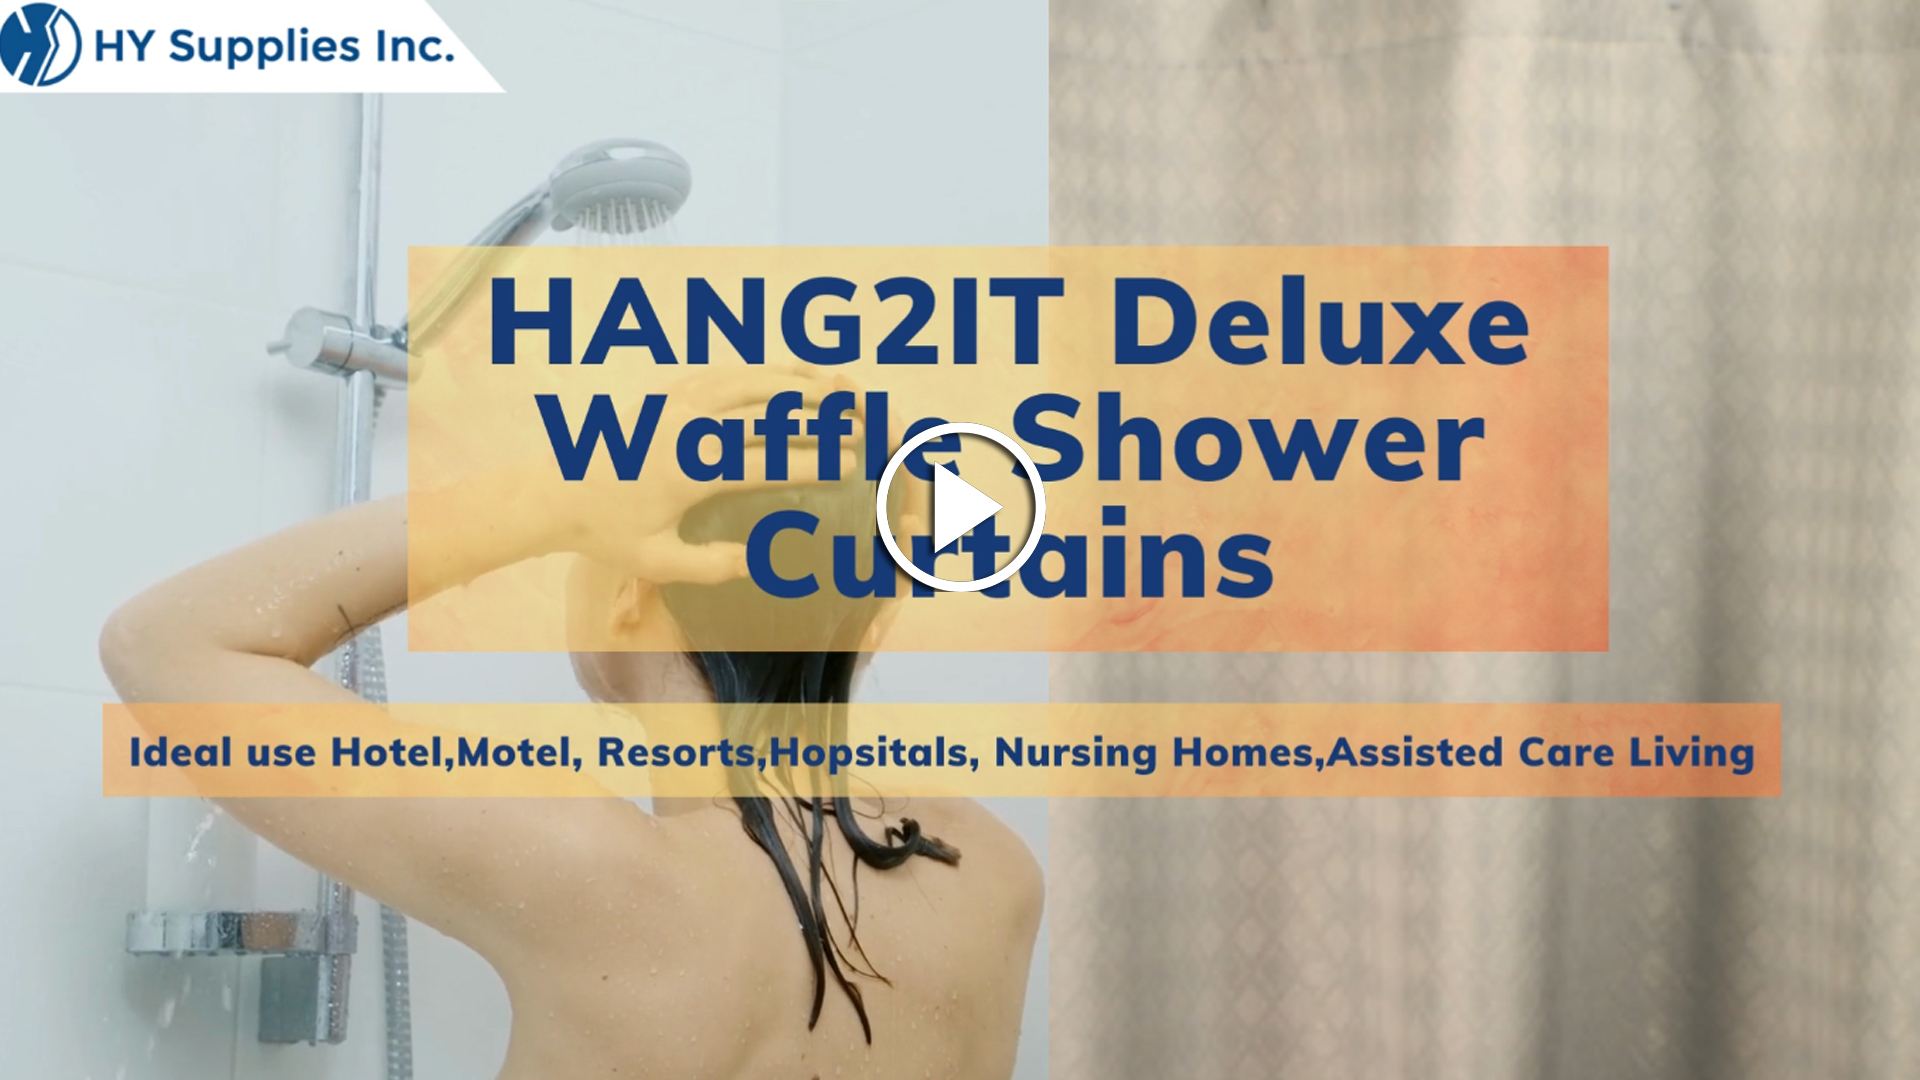 HANG2IT Deluxe Waffle Shower Curtains